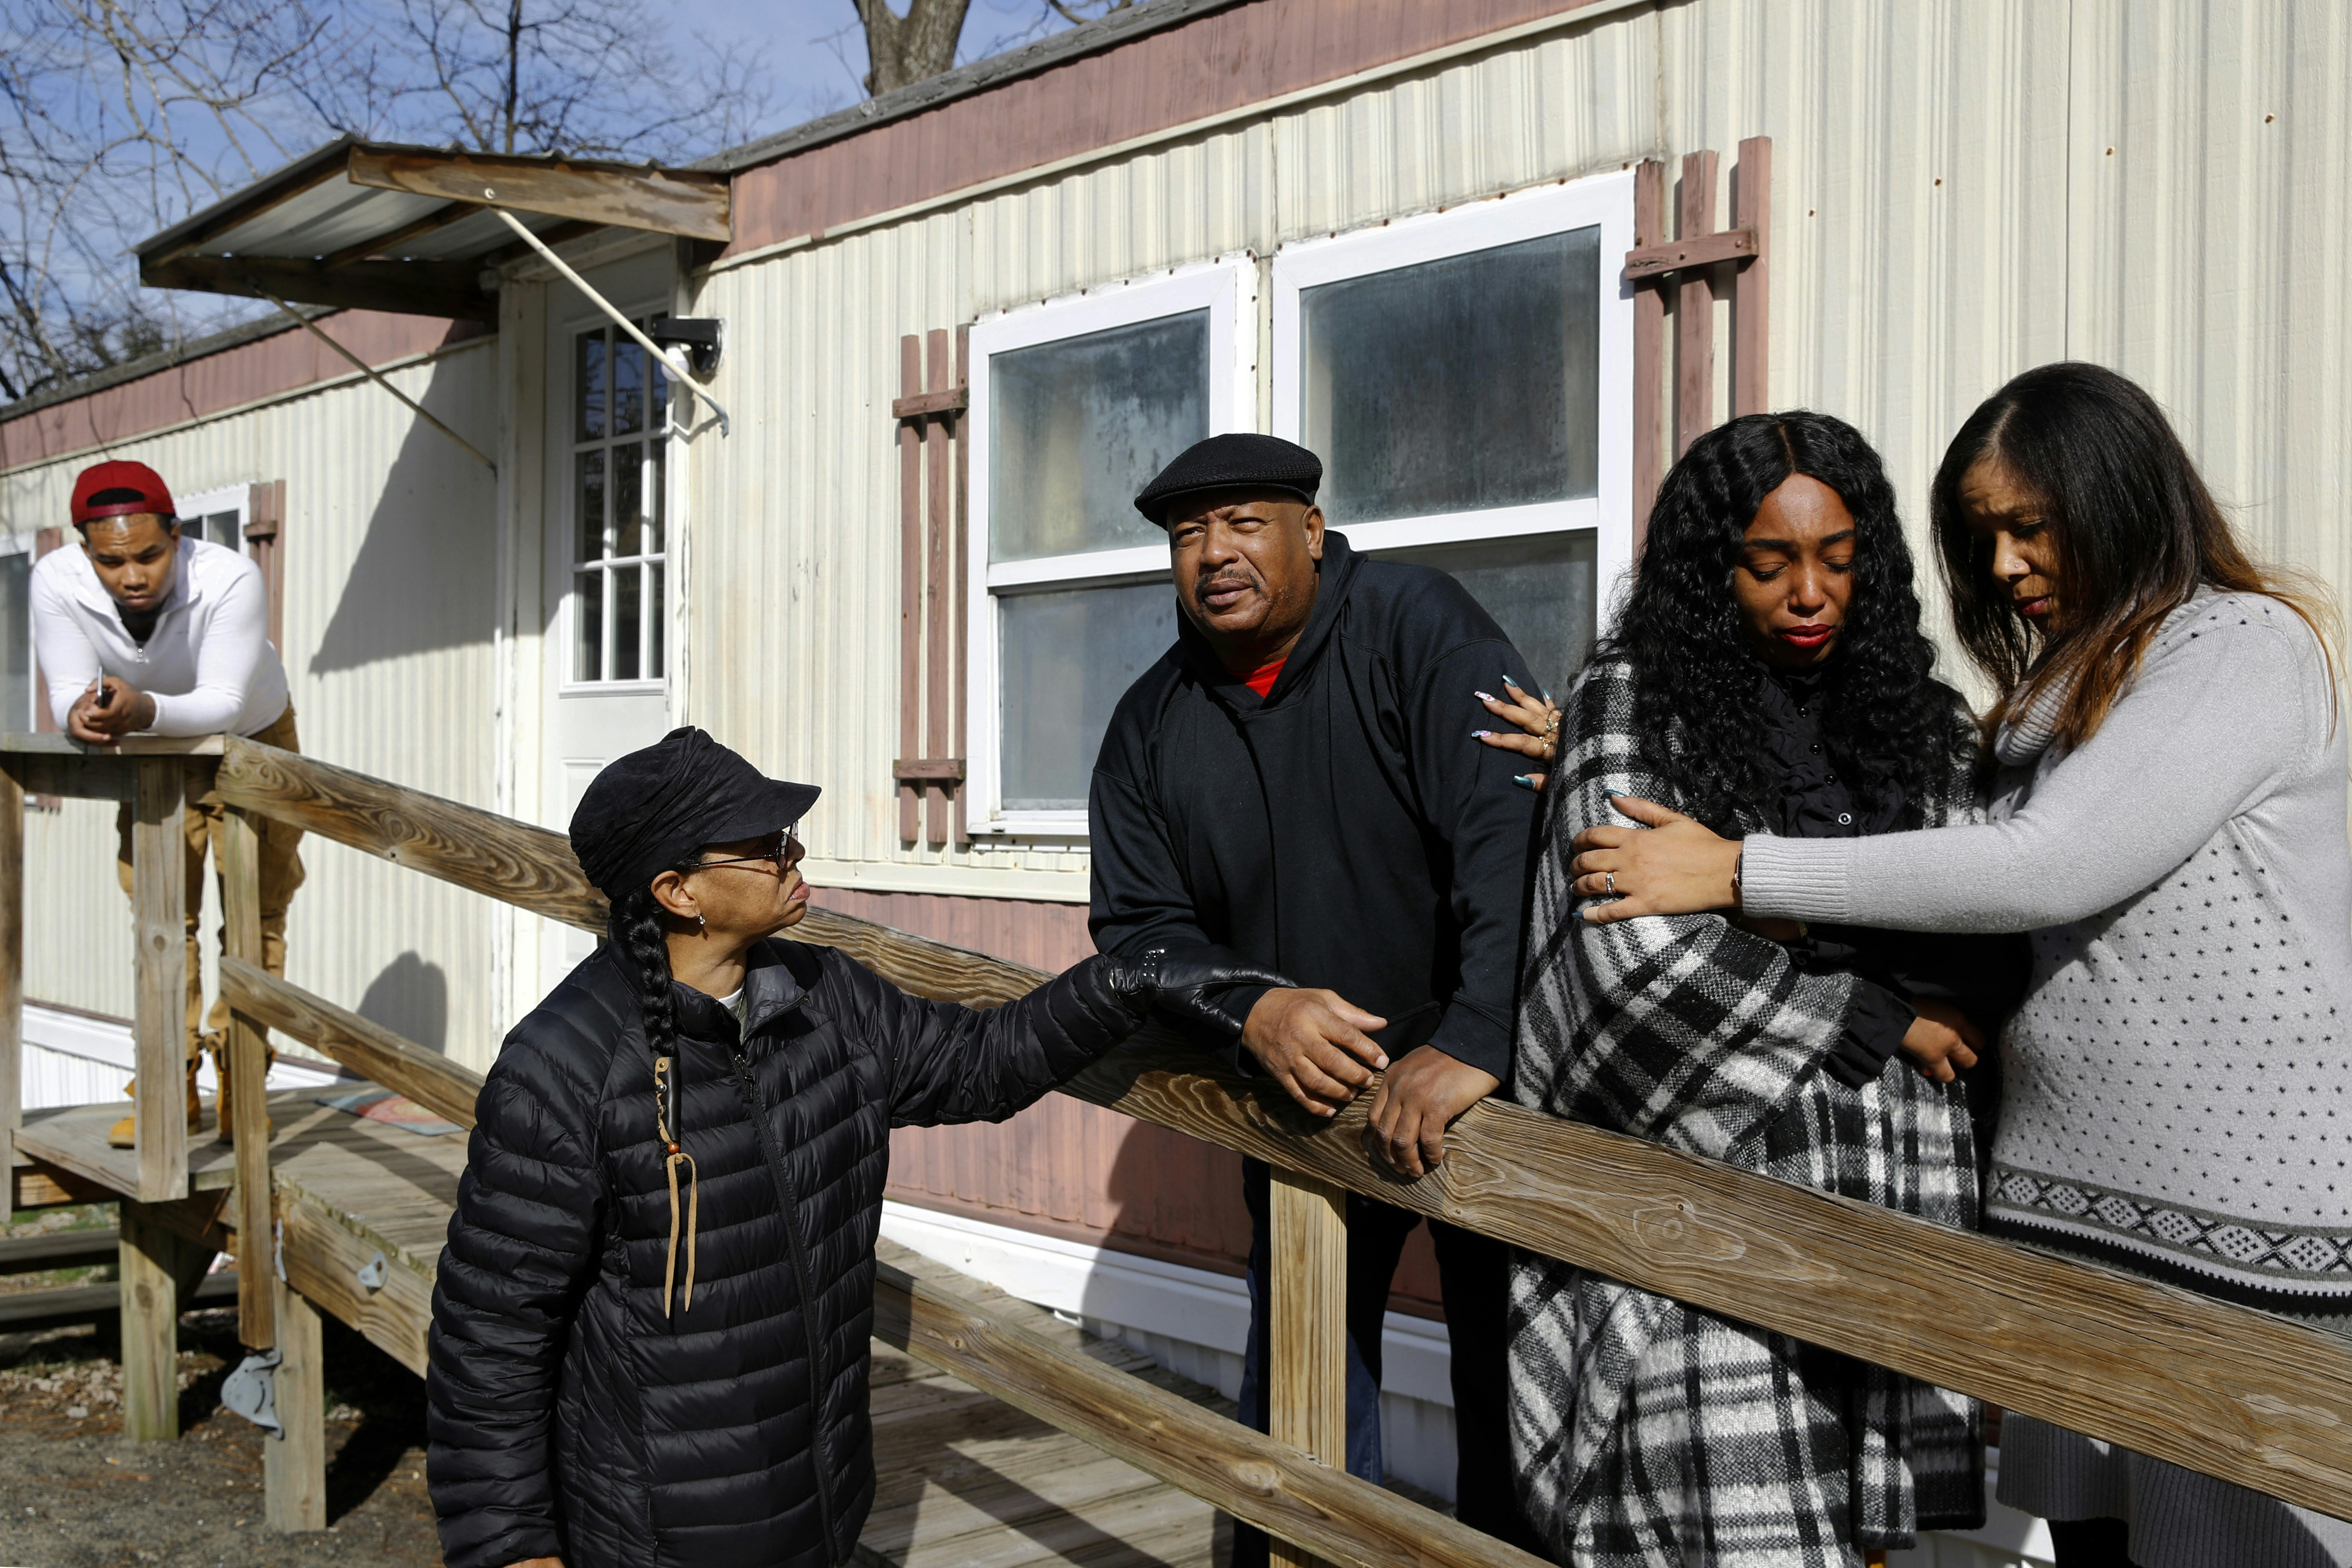 In this Jan. 28, 2019, photo, Brandon Jackson, from far left, Kym Lofland, Antone Black, Monique Sorrell and LaToya Holley stand on a ramp where a struggle among their family member Anton Black and three police officers and a civilian occurred before his death outside the home in Greensboro, Md. The family isn't satisfied by the conclusions of a county prosecutor, who isn't pursuing criminal charges in Black's death, or the medical examiner who ruled it accidental. They're calling for a federal investigation and appealing for help from Gov. Larry Hogan, who already has expressed a personal interest in the case. (AP Photo/Patrick Semansky)